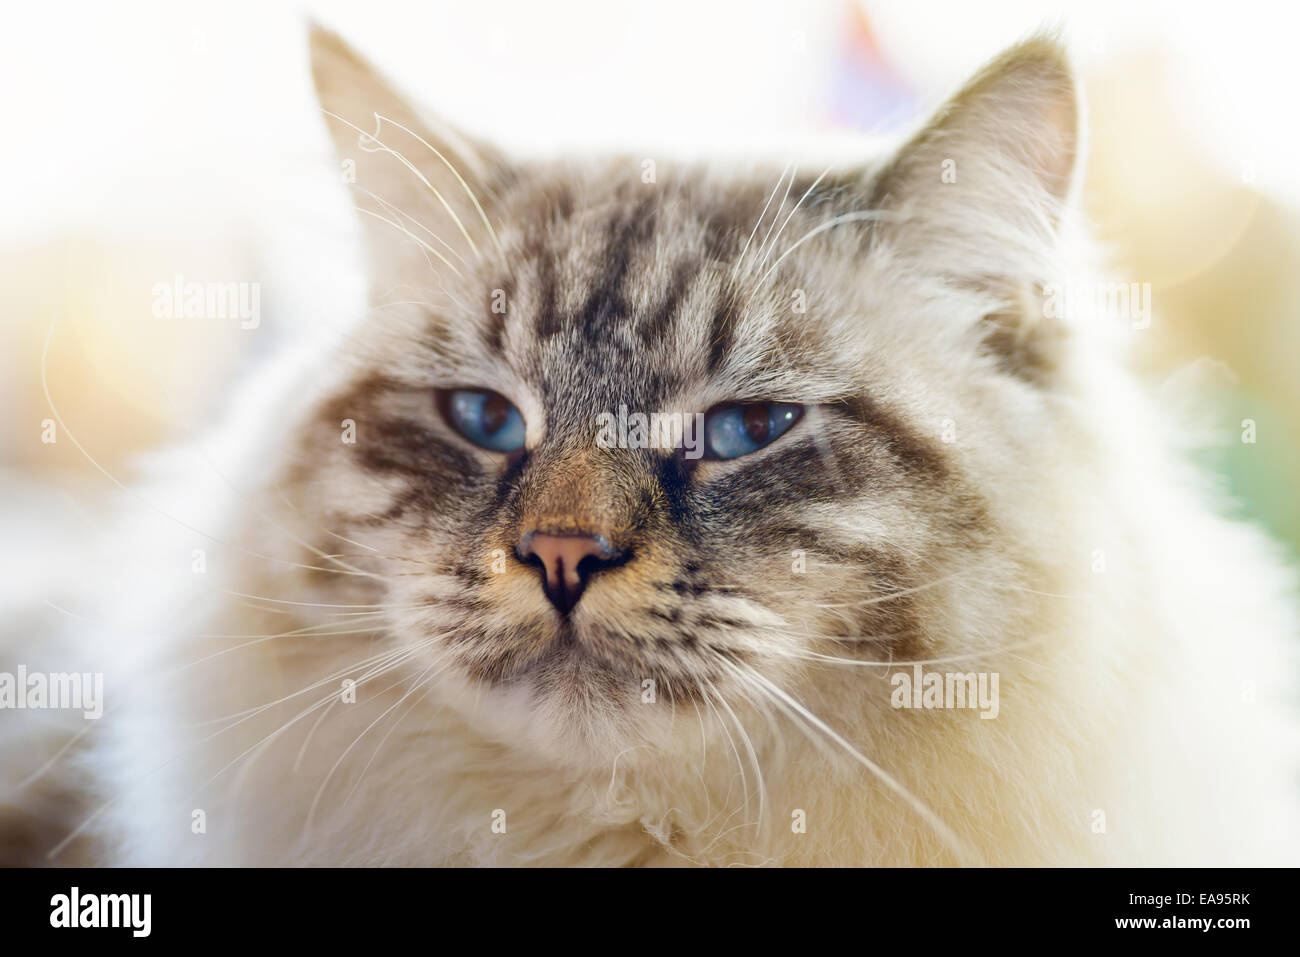 Animals: close-up portrait of blue-eyed Ragamuffin cat, blurred background, sunlight effect added Stock Photo